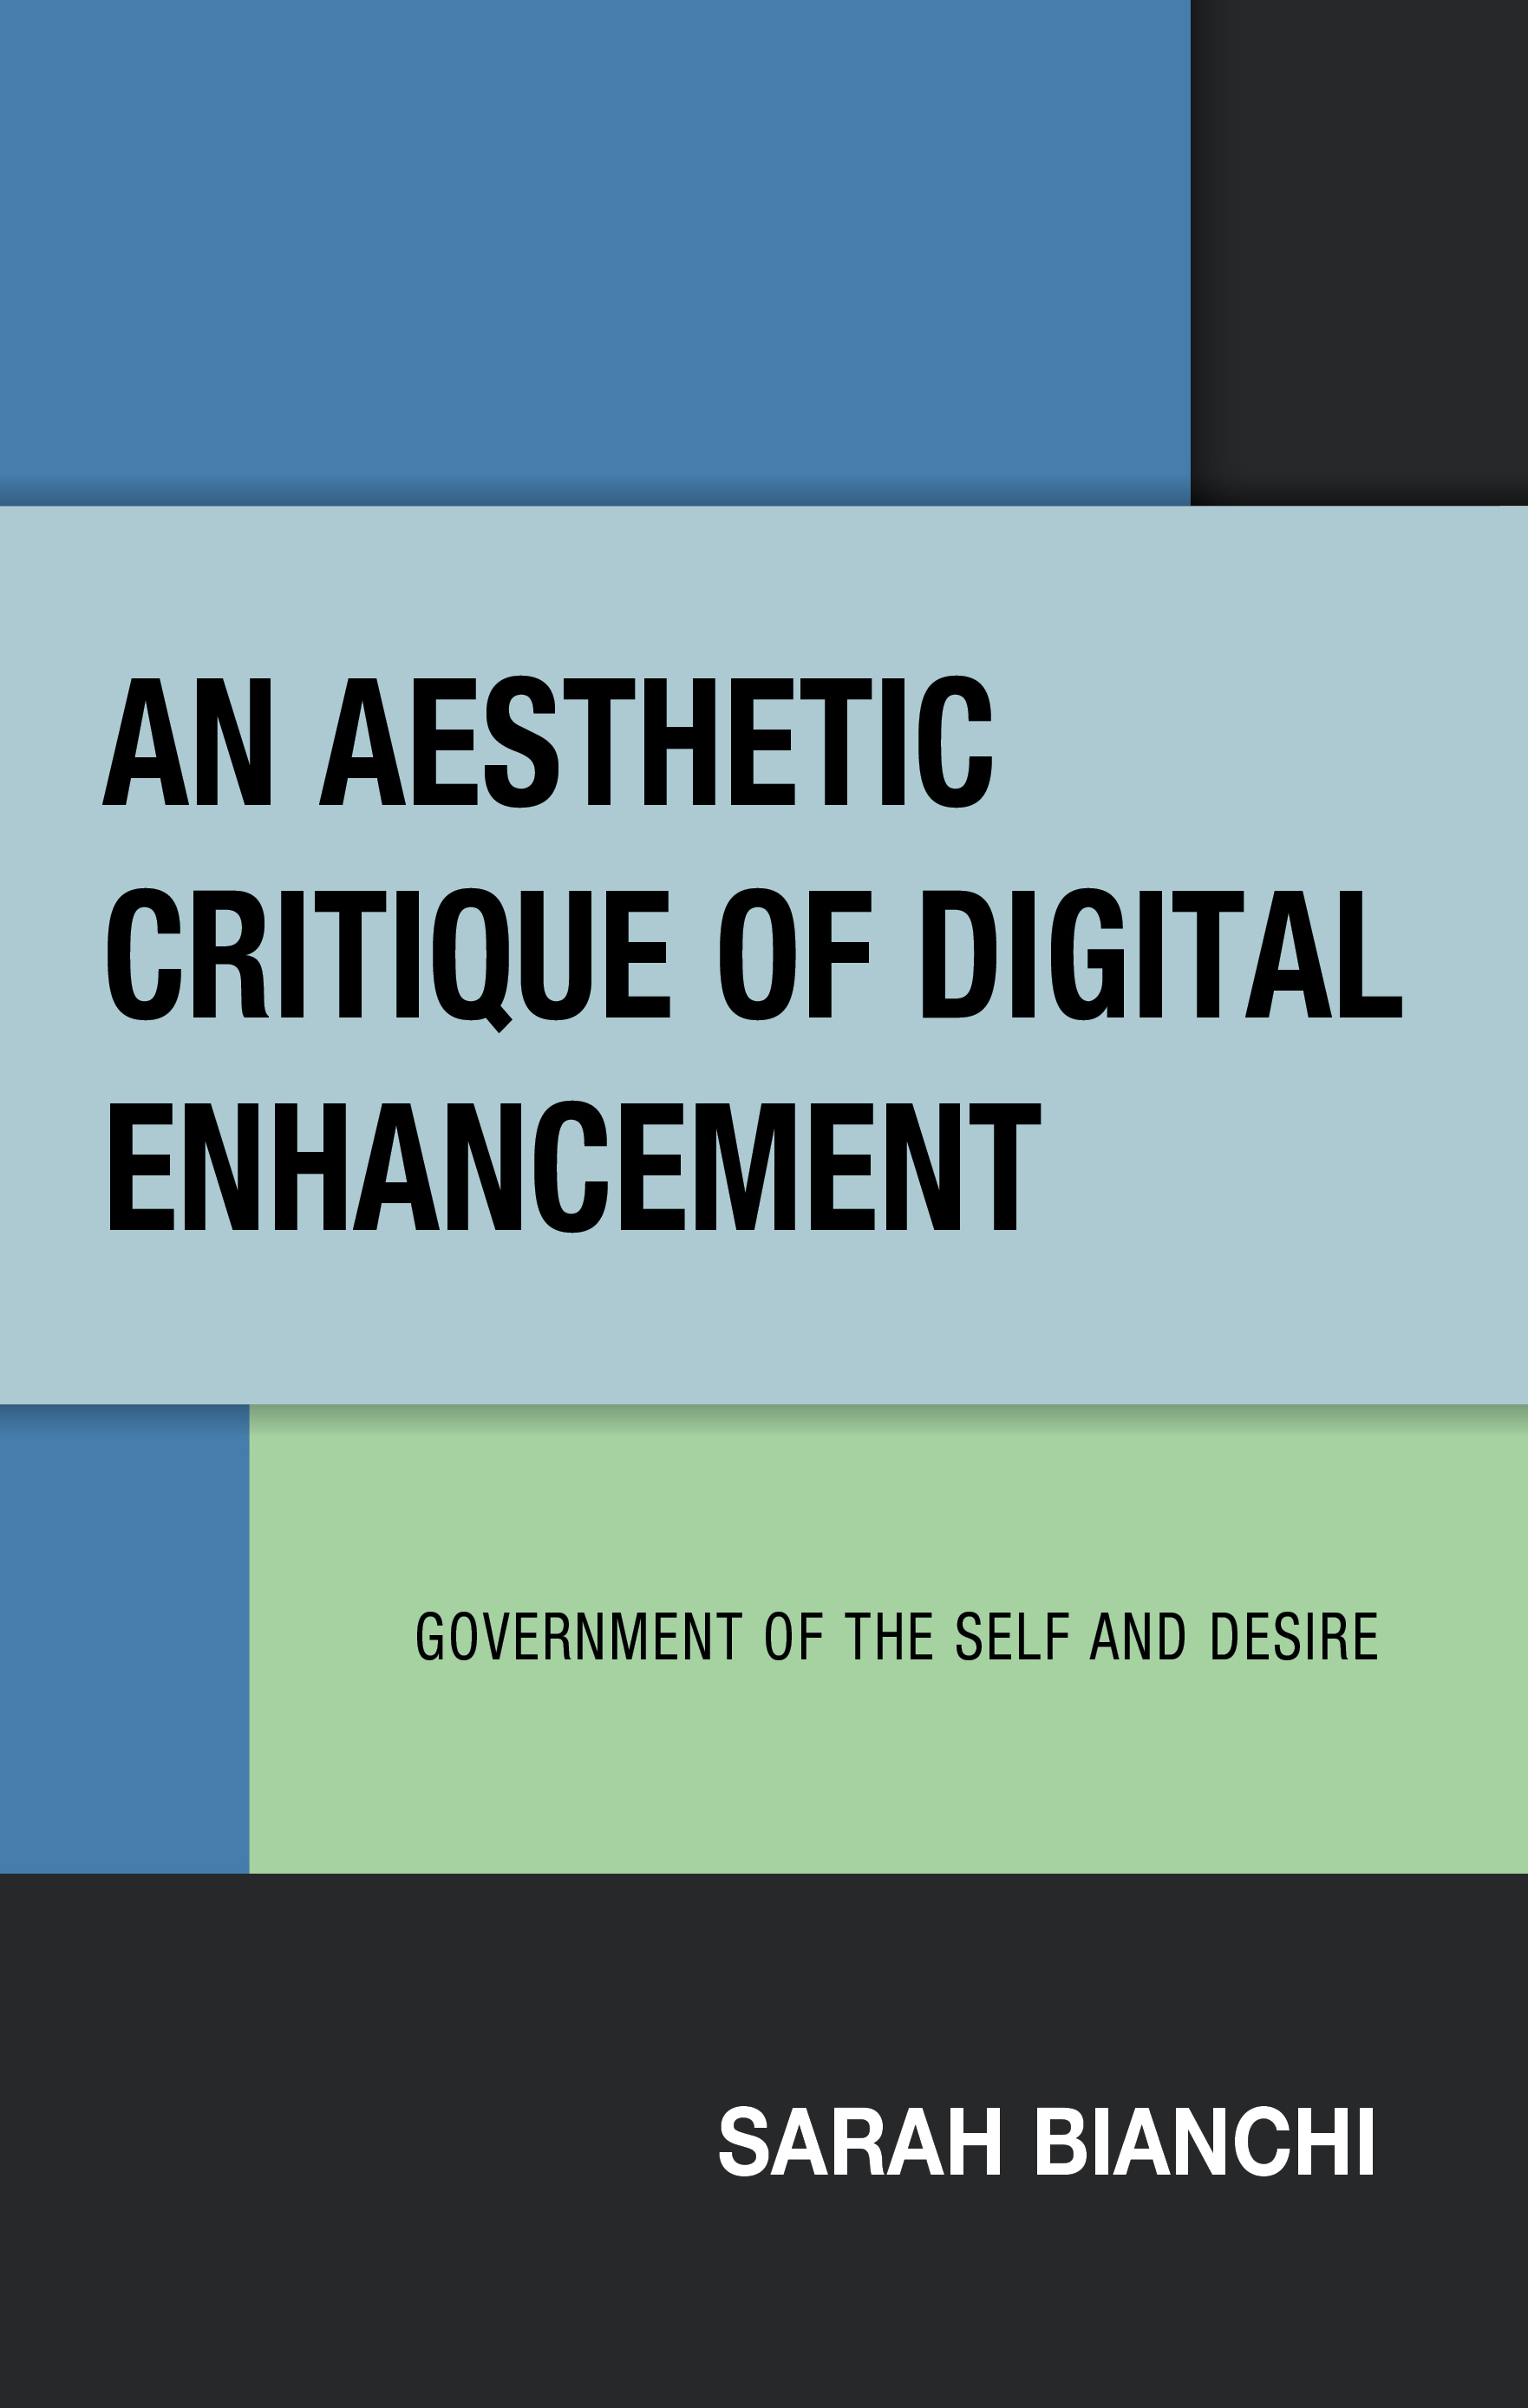 An Aesthetic Critique of Digital Enhancement: Government of the Self and Desire